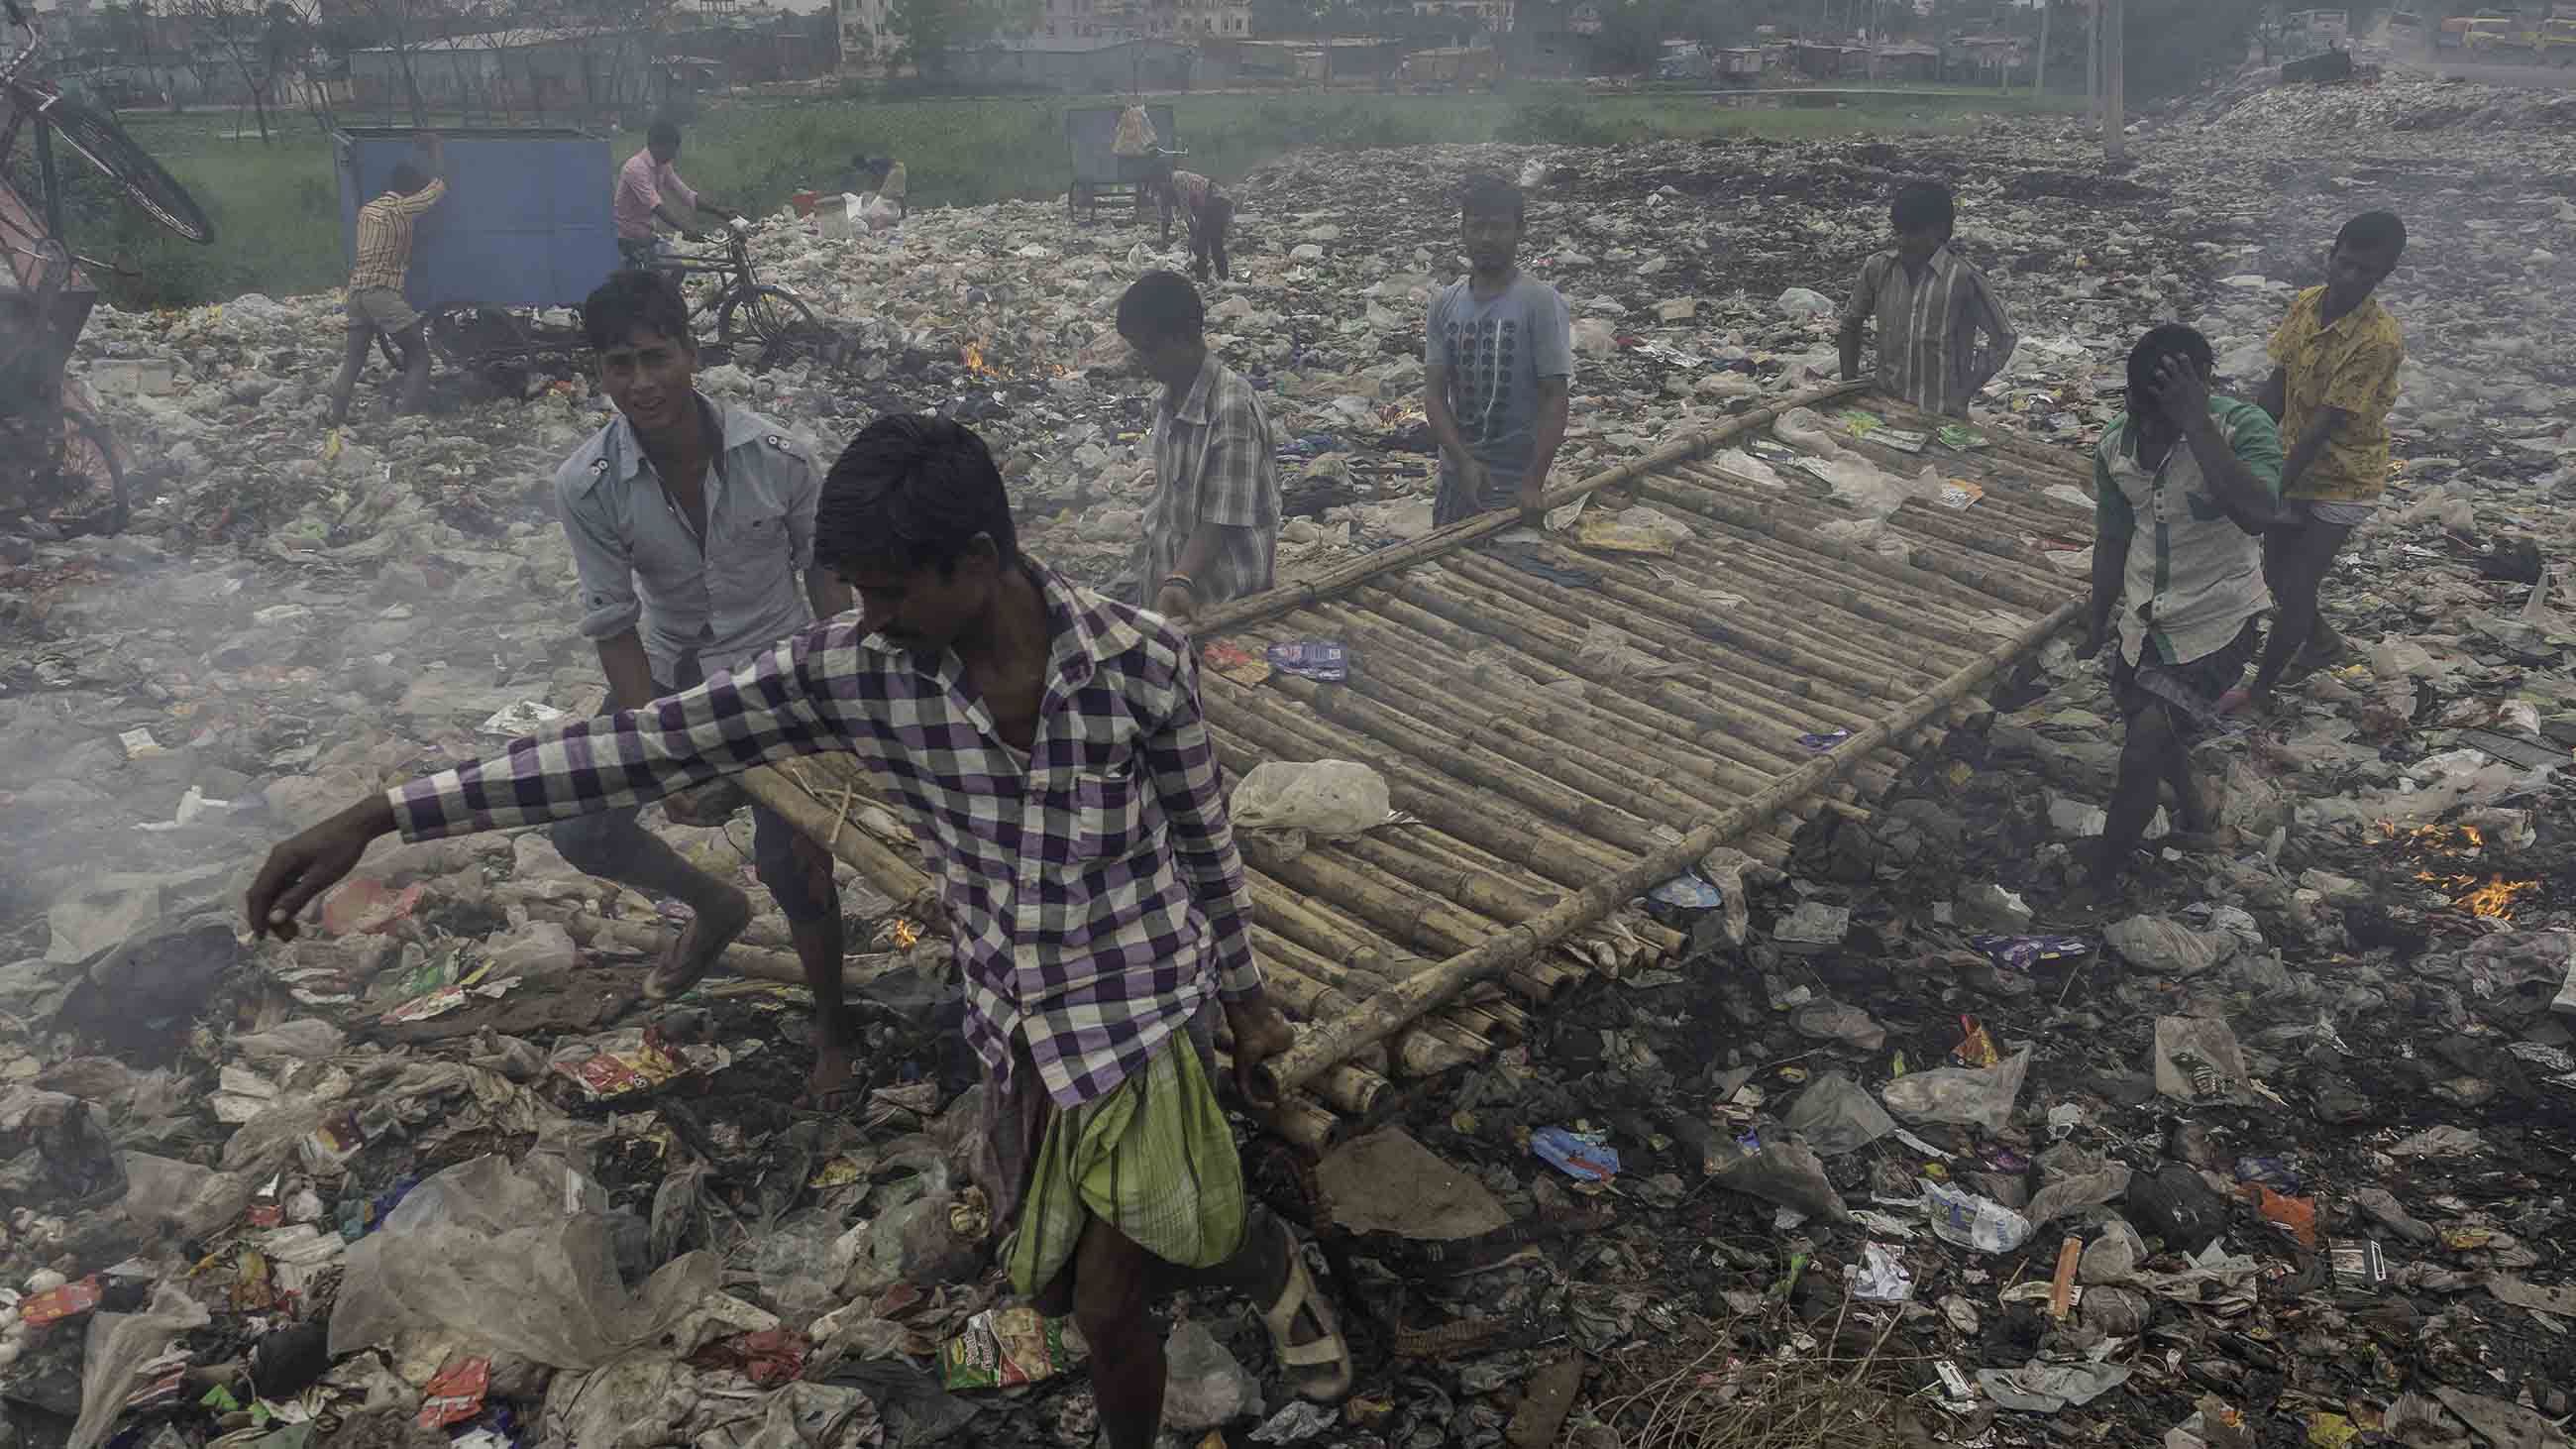 With little in the way of collection services, trash is often found smoldering in the streets, adding to the ambient waves of particulate matter. Image by Larry C. Price. Bangladesh, 2018.